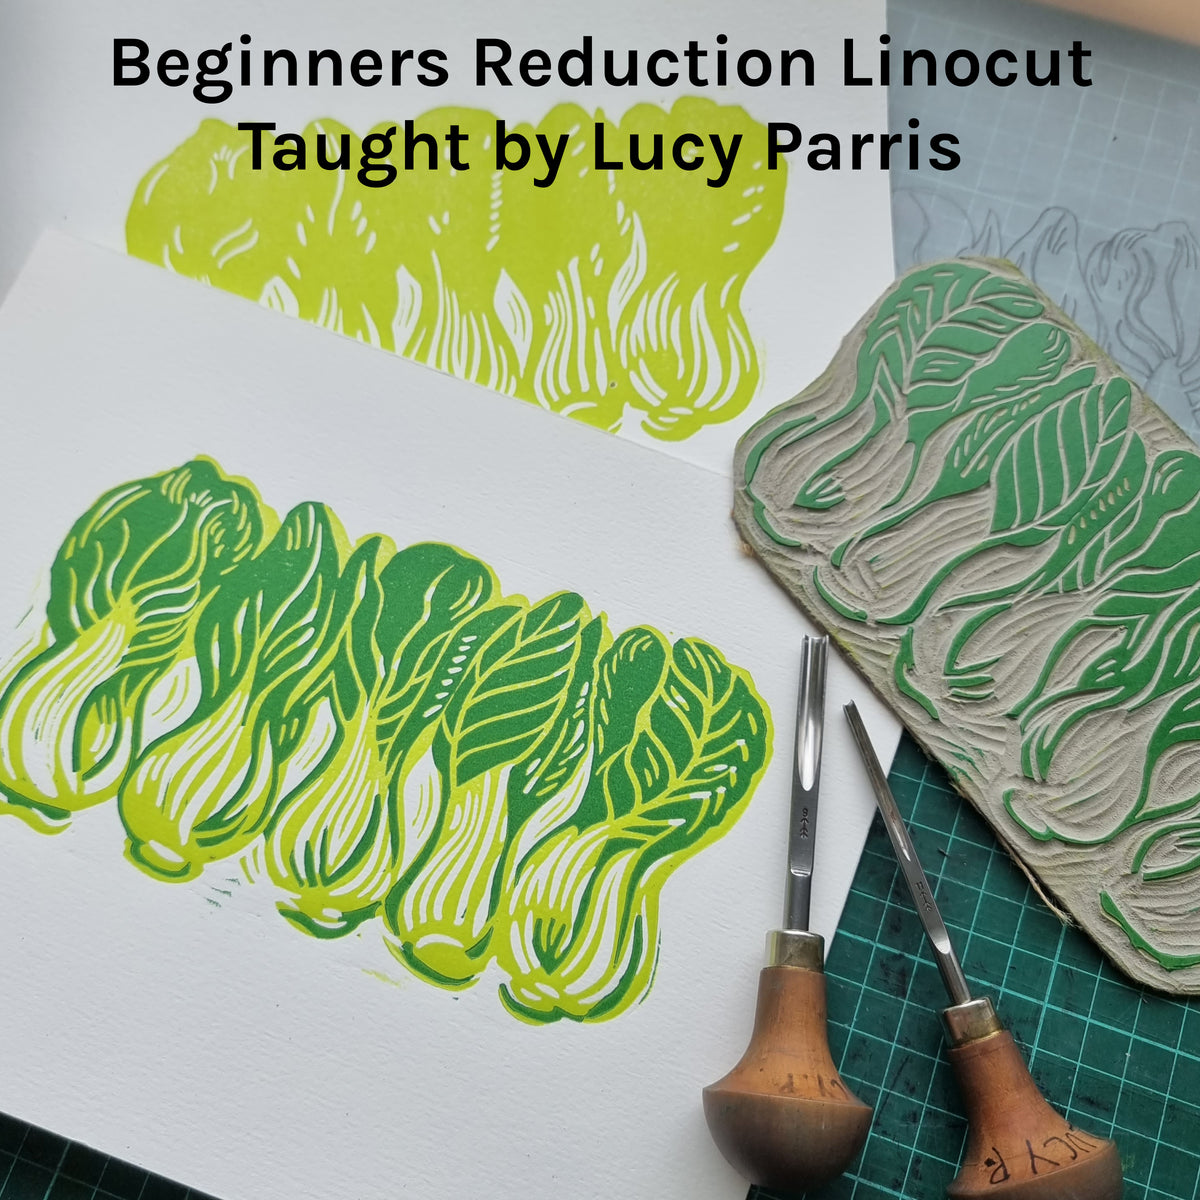 Beginners Reduction Linocut Taught by Lucy Parris March 11